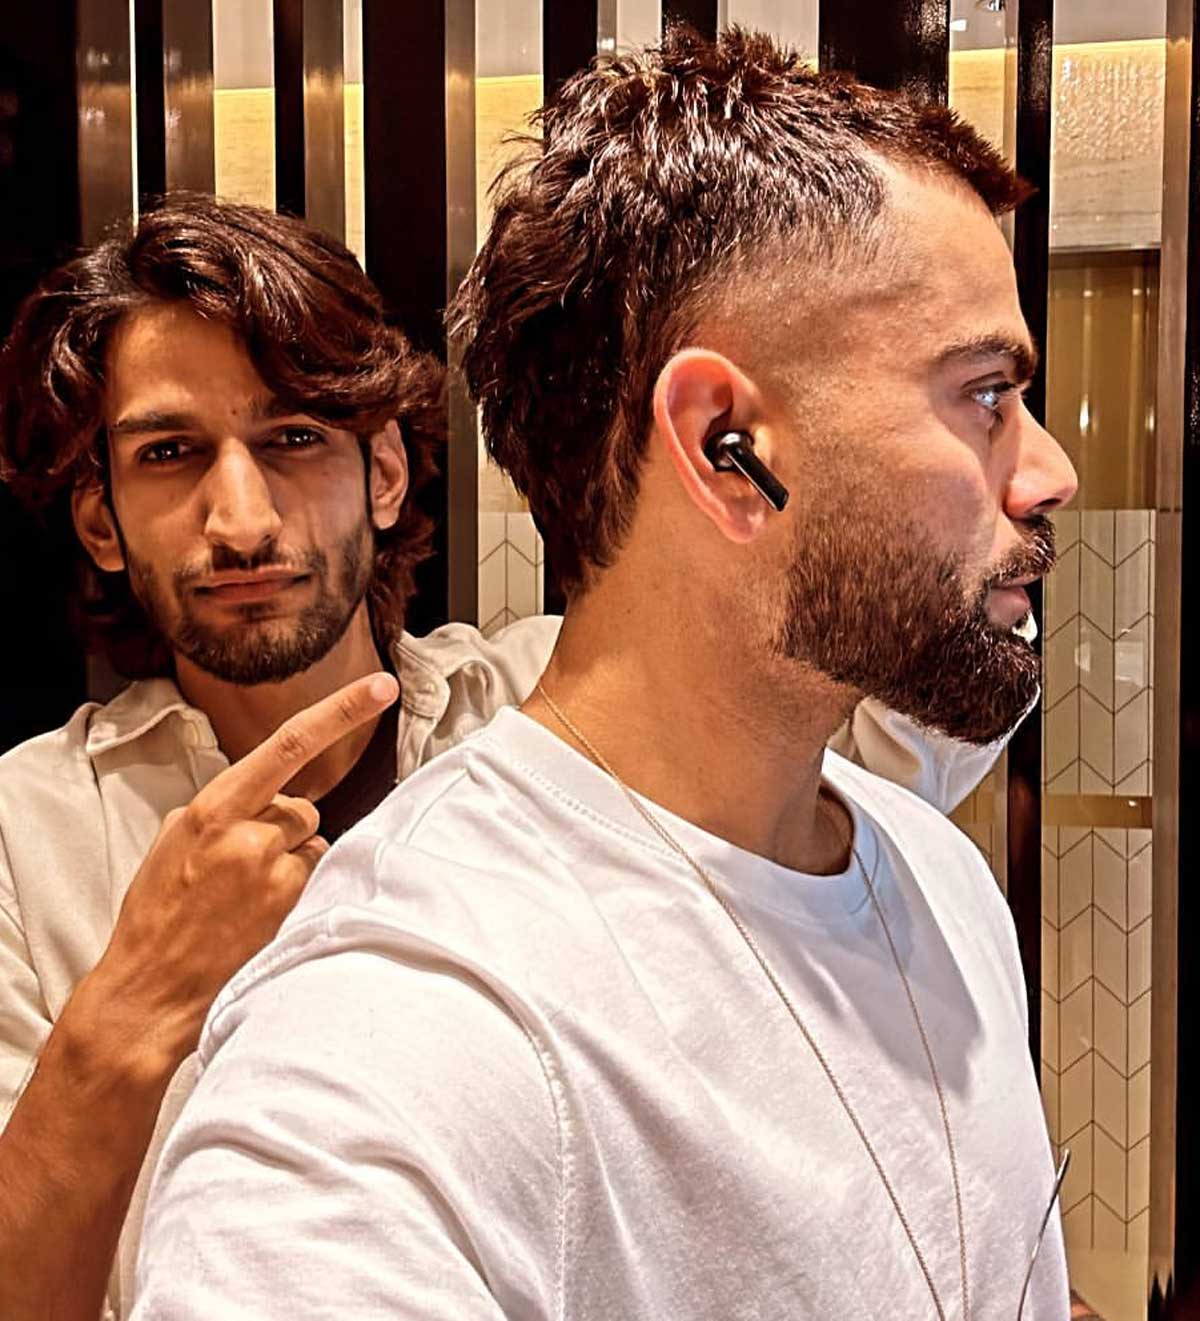 virat.kohli flaunts his new hairstyle ahead of Asia Cup 2023. He looks  uber-cool. What do you think? #ViratKohli #AsiaCup2023… | Instagram